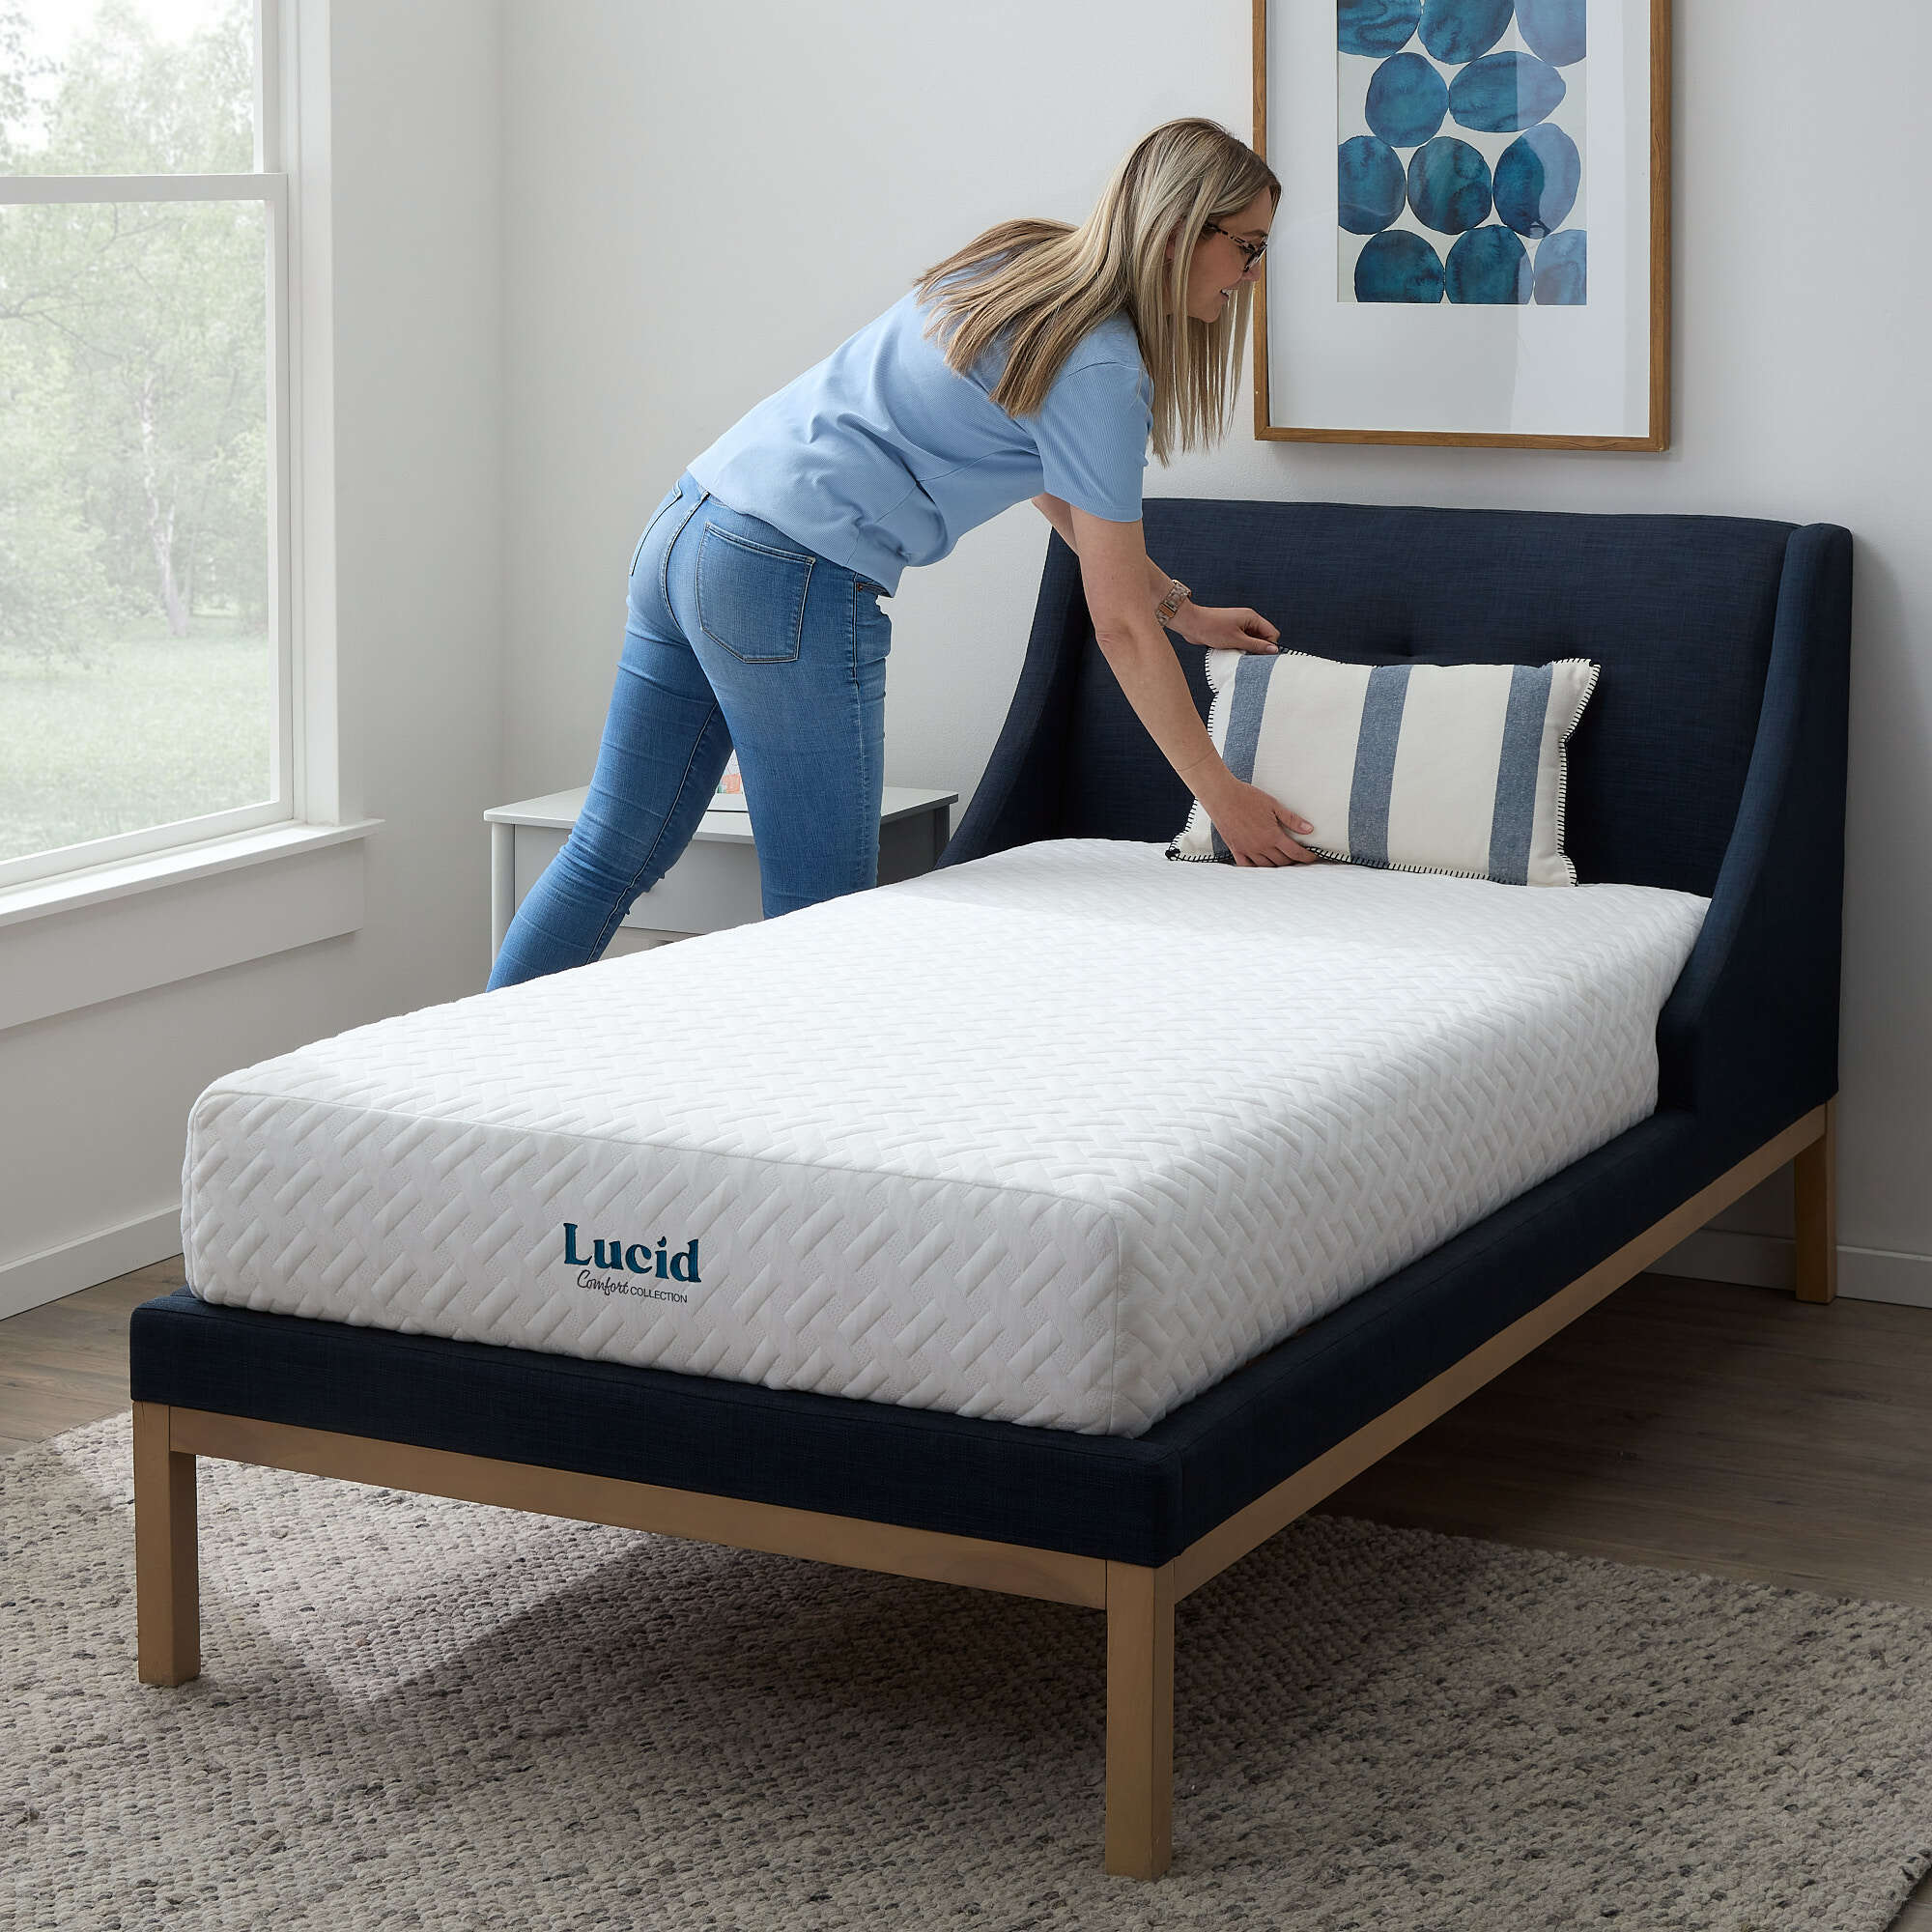 LUCID Comfort Collection Mattresses at